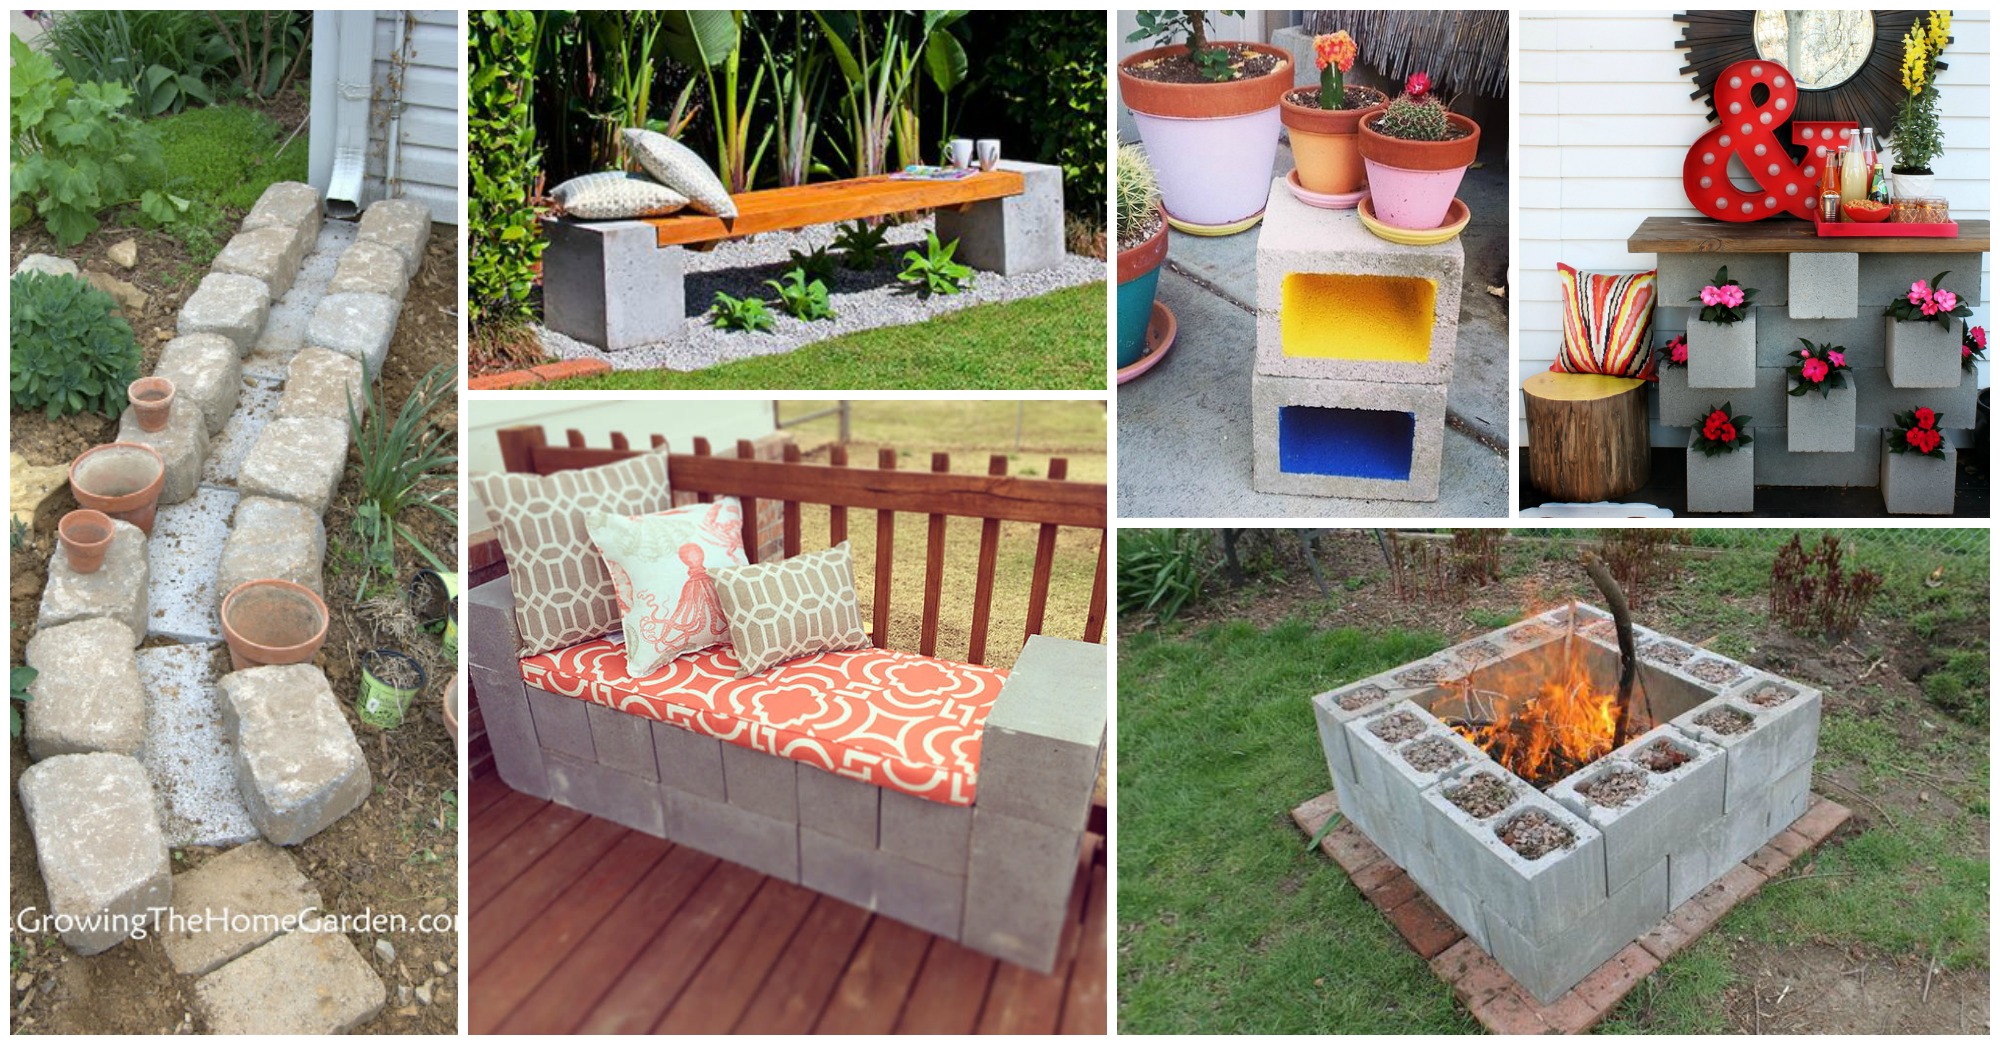 17 Extraordinary Ideas on How to Decorate Your Yard with Cinder Blocks